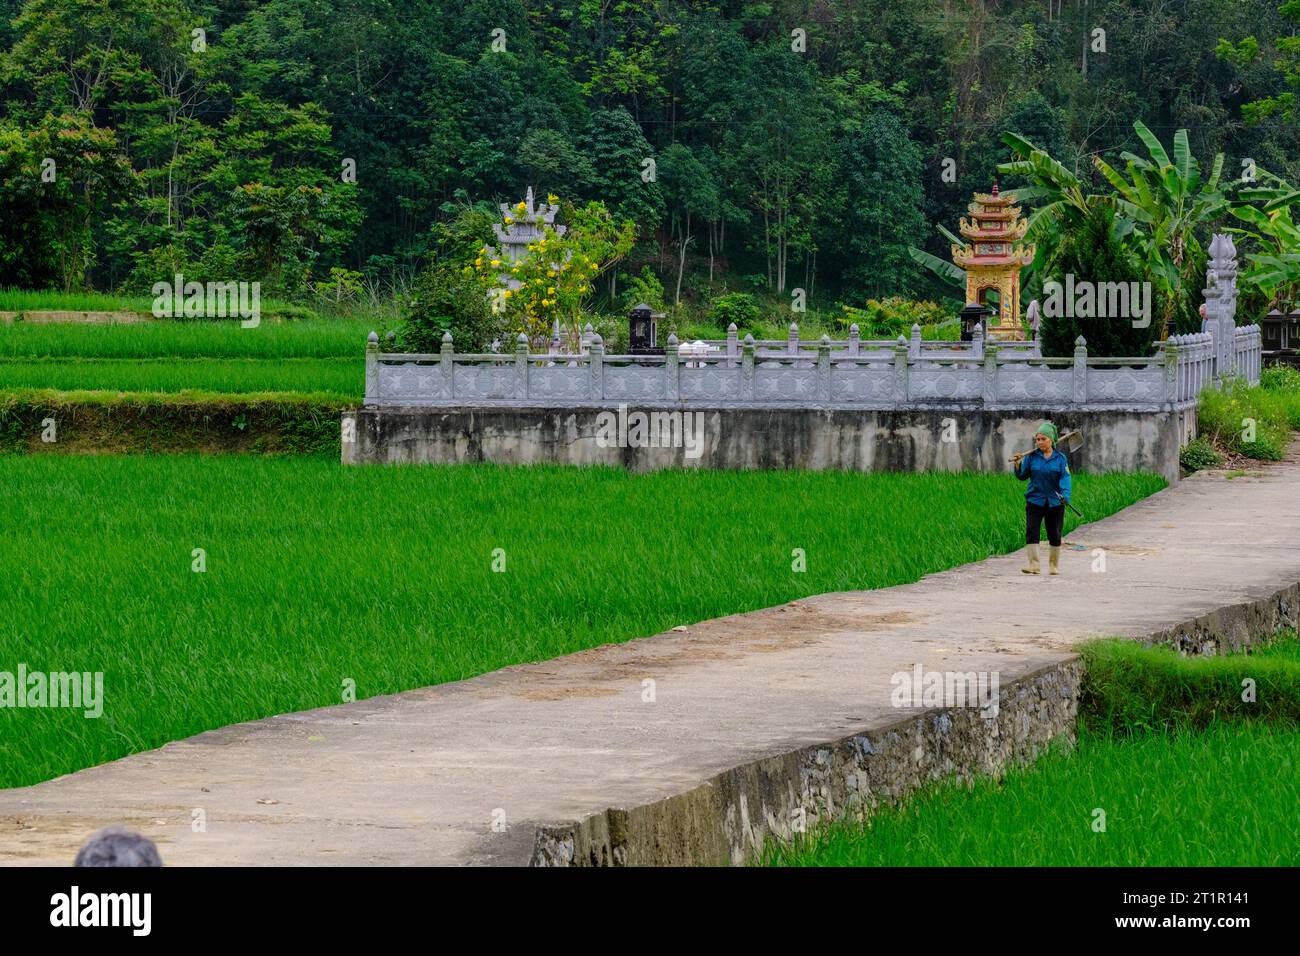 Vietnam, Lao Cai Province. Woman Walking Past Cemetery en route to Working in Surrounding Rice Paddy. Stock Photo